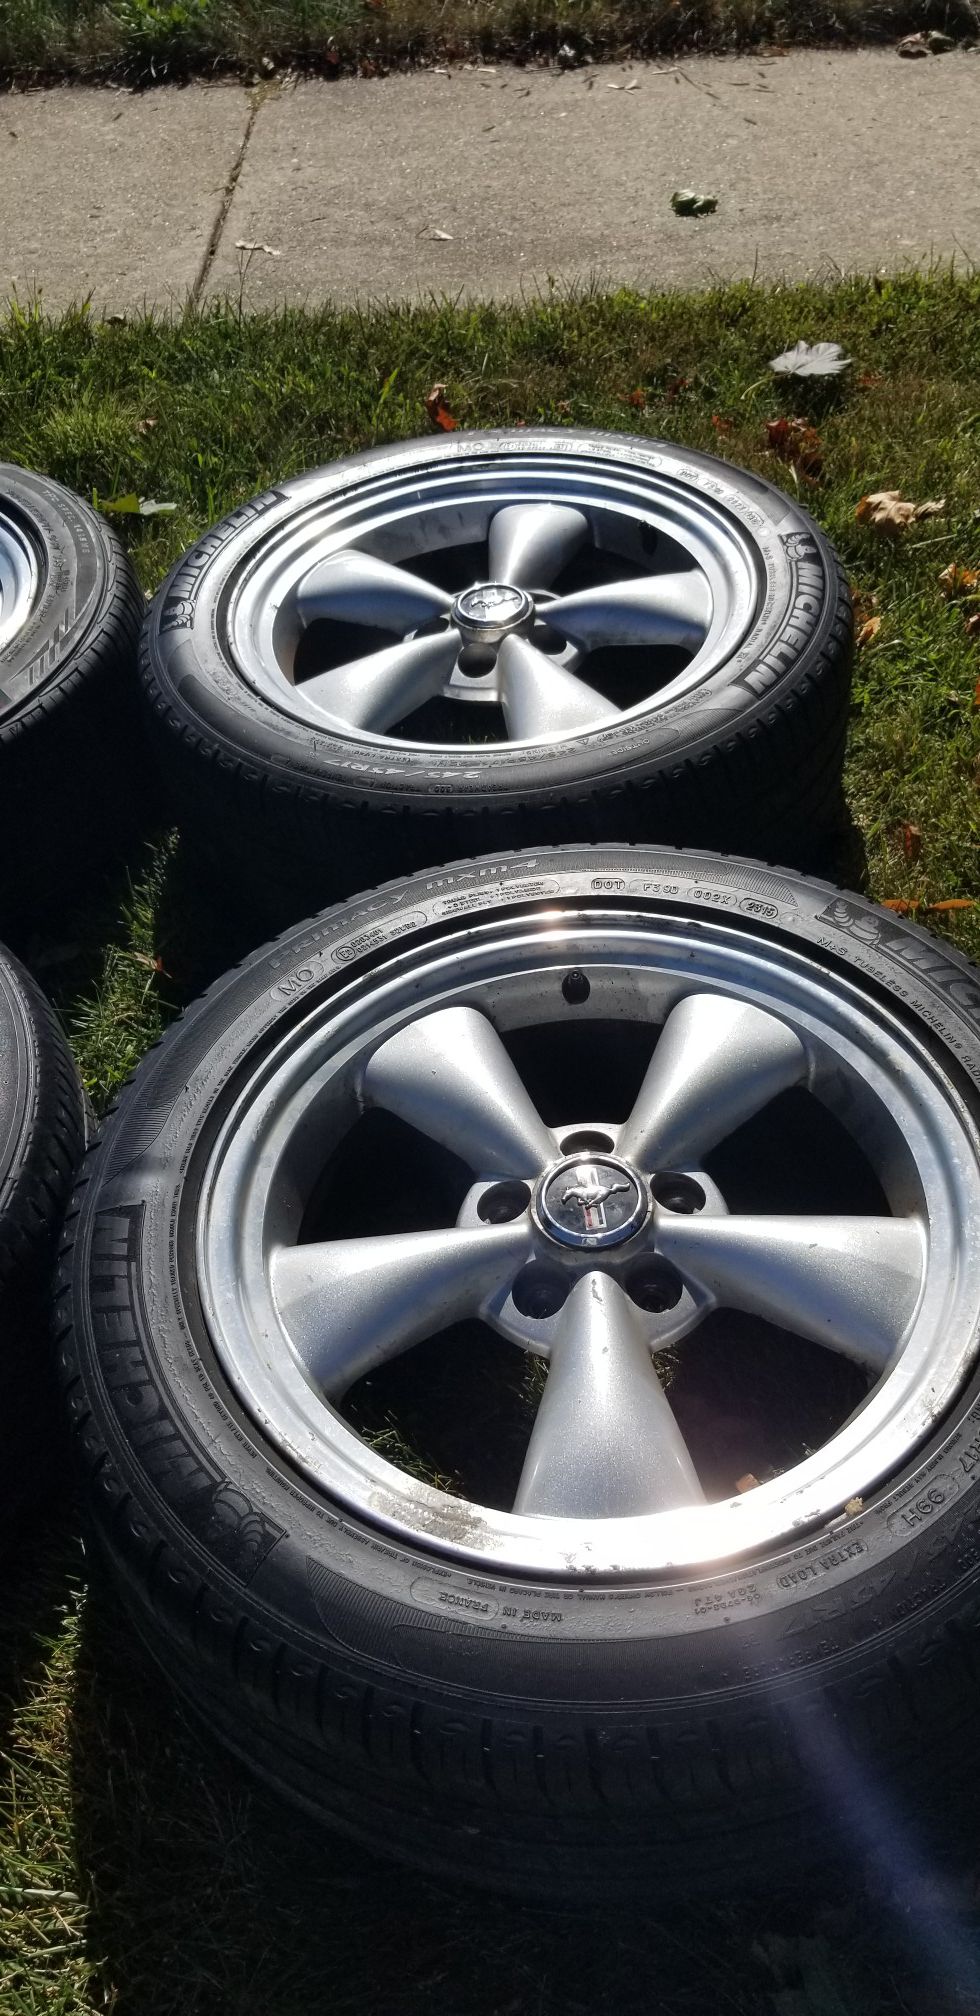 17 in mustang wheels rims with tires 245 45 17 5x114.3